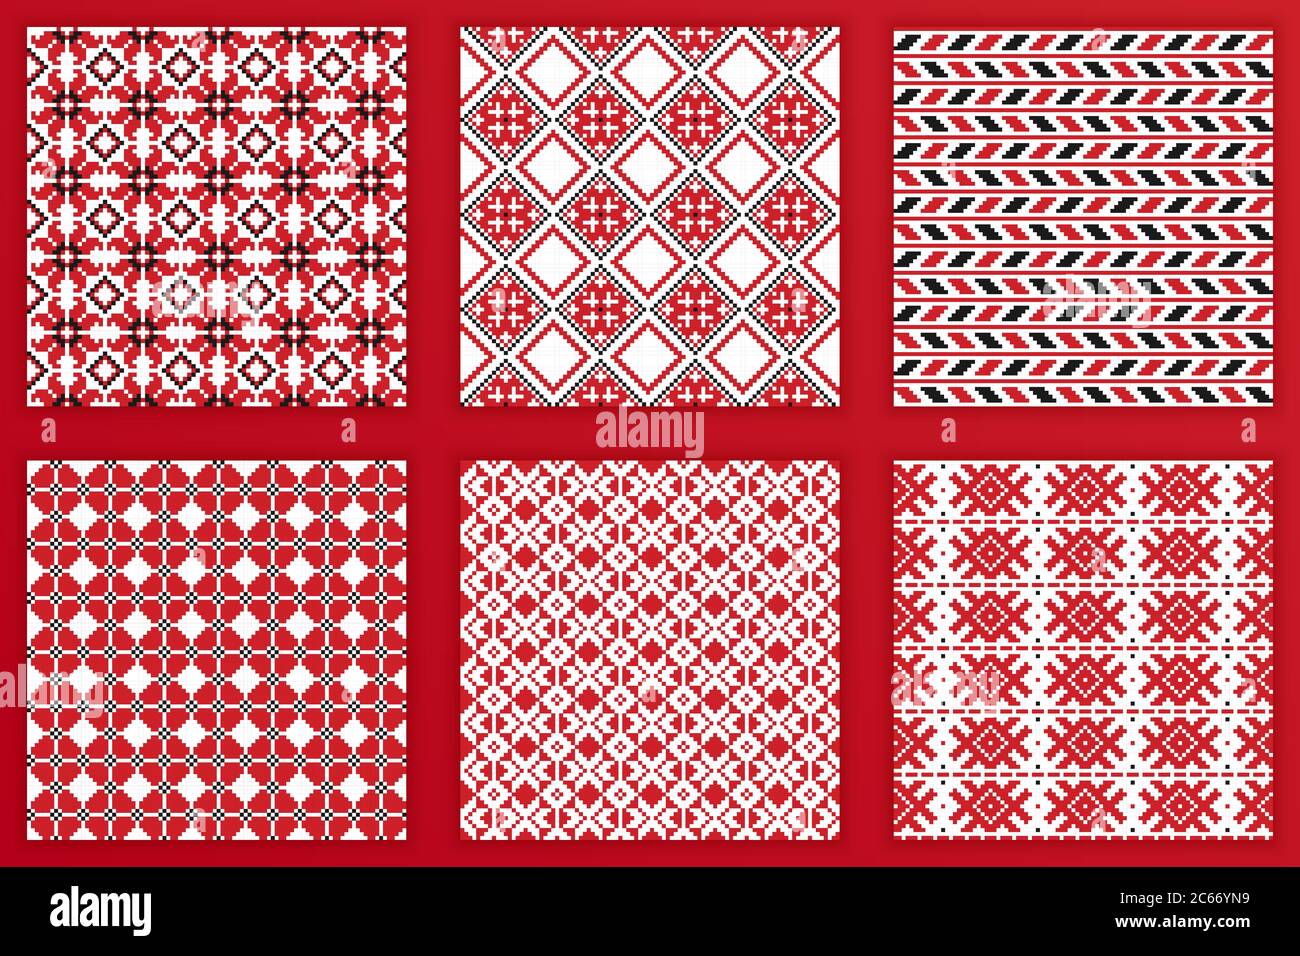 Slavic geometric seamless patterns set. Vector illustration of tileable Slavic embroidery backgrounds for your design projects Stock Vector